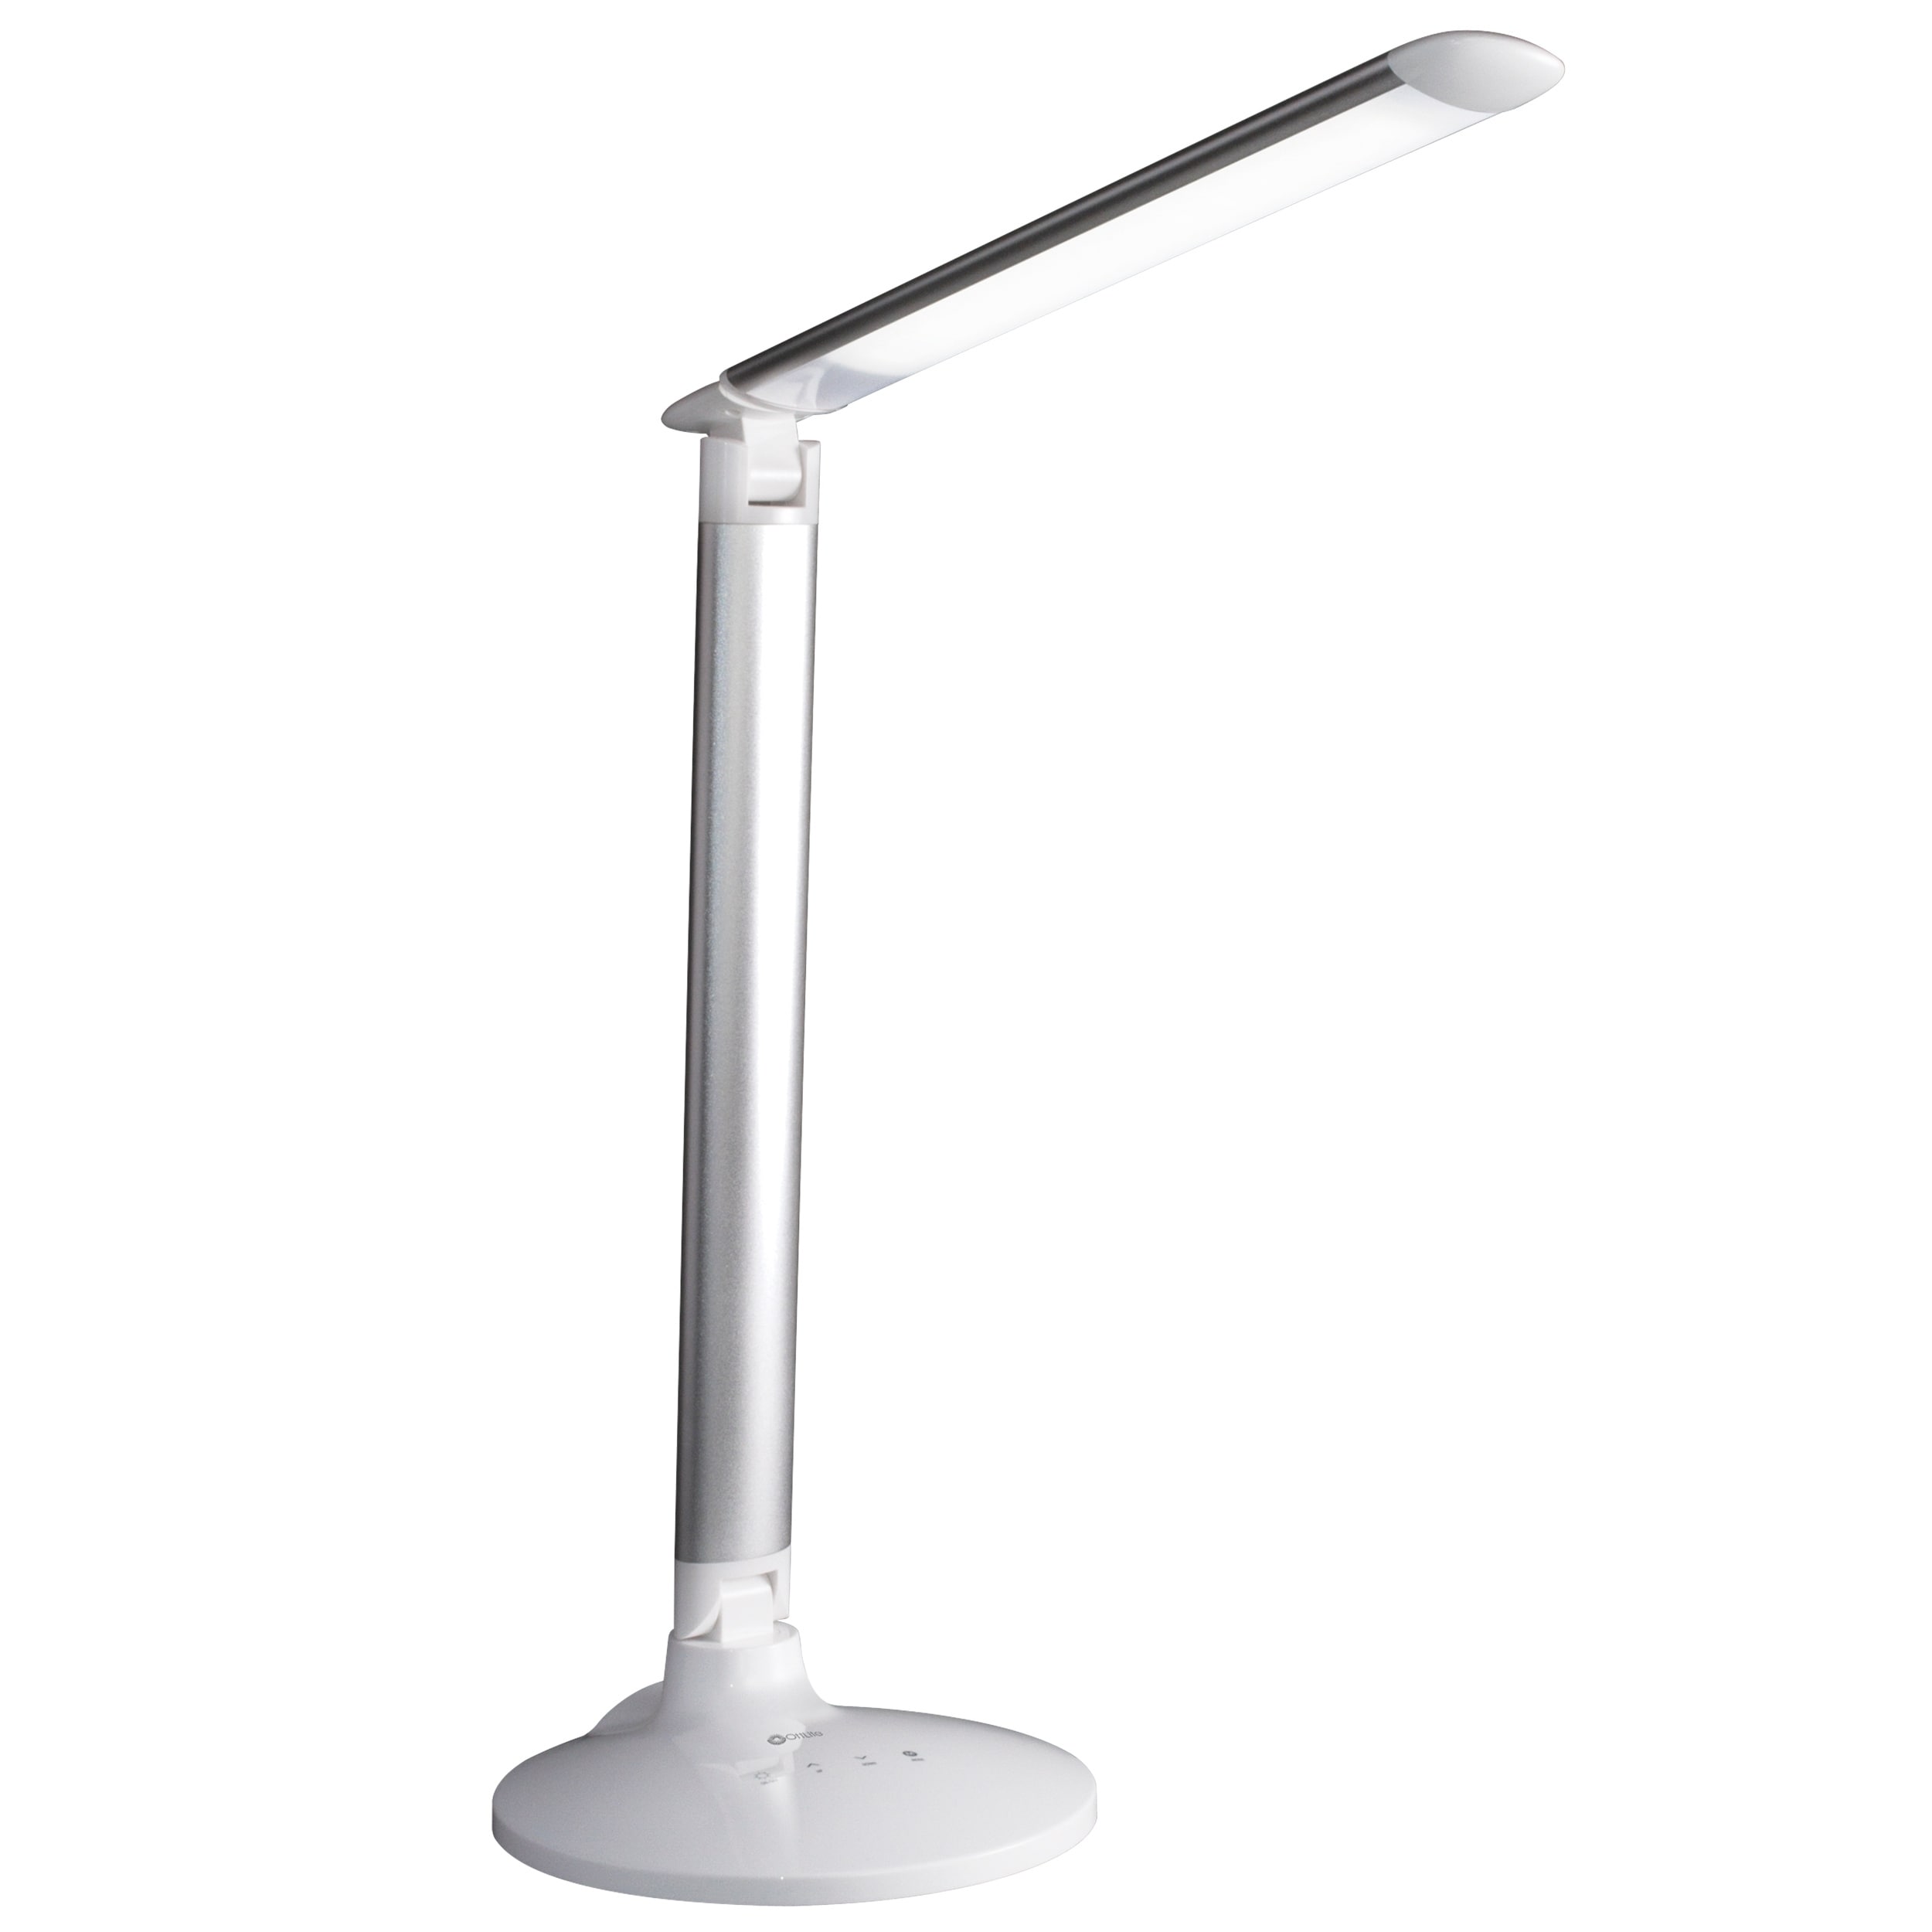 OttLite Wellness Series® Command LED Desk Lamp with Voice Assistant